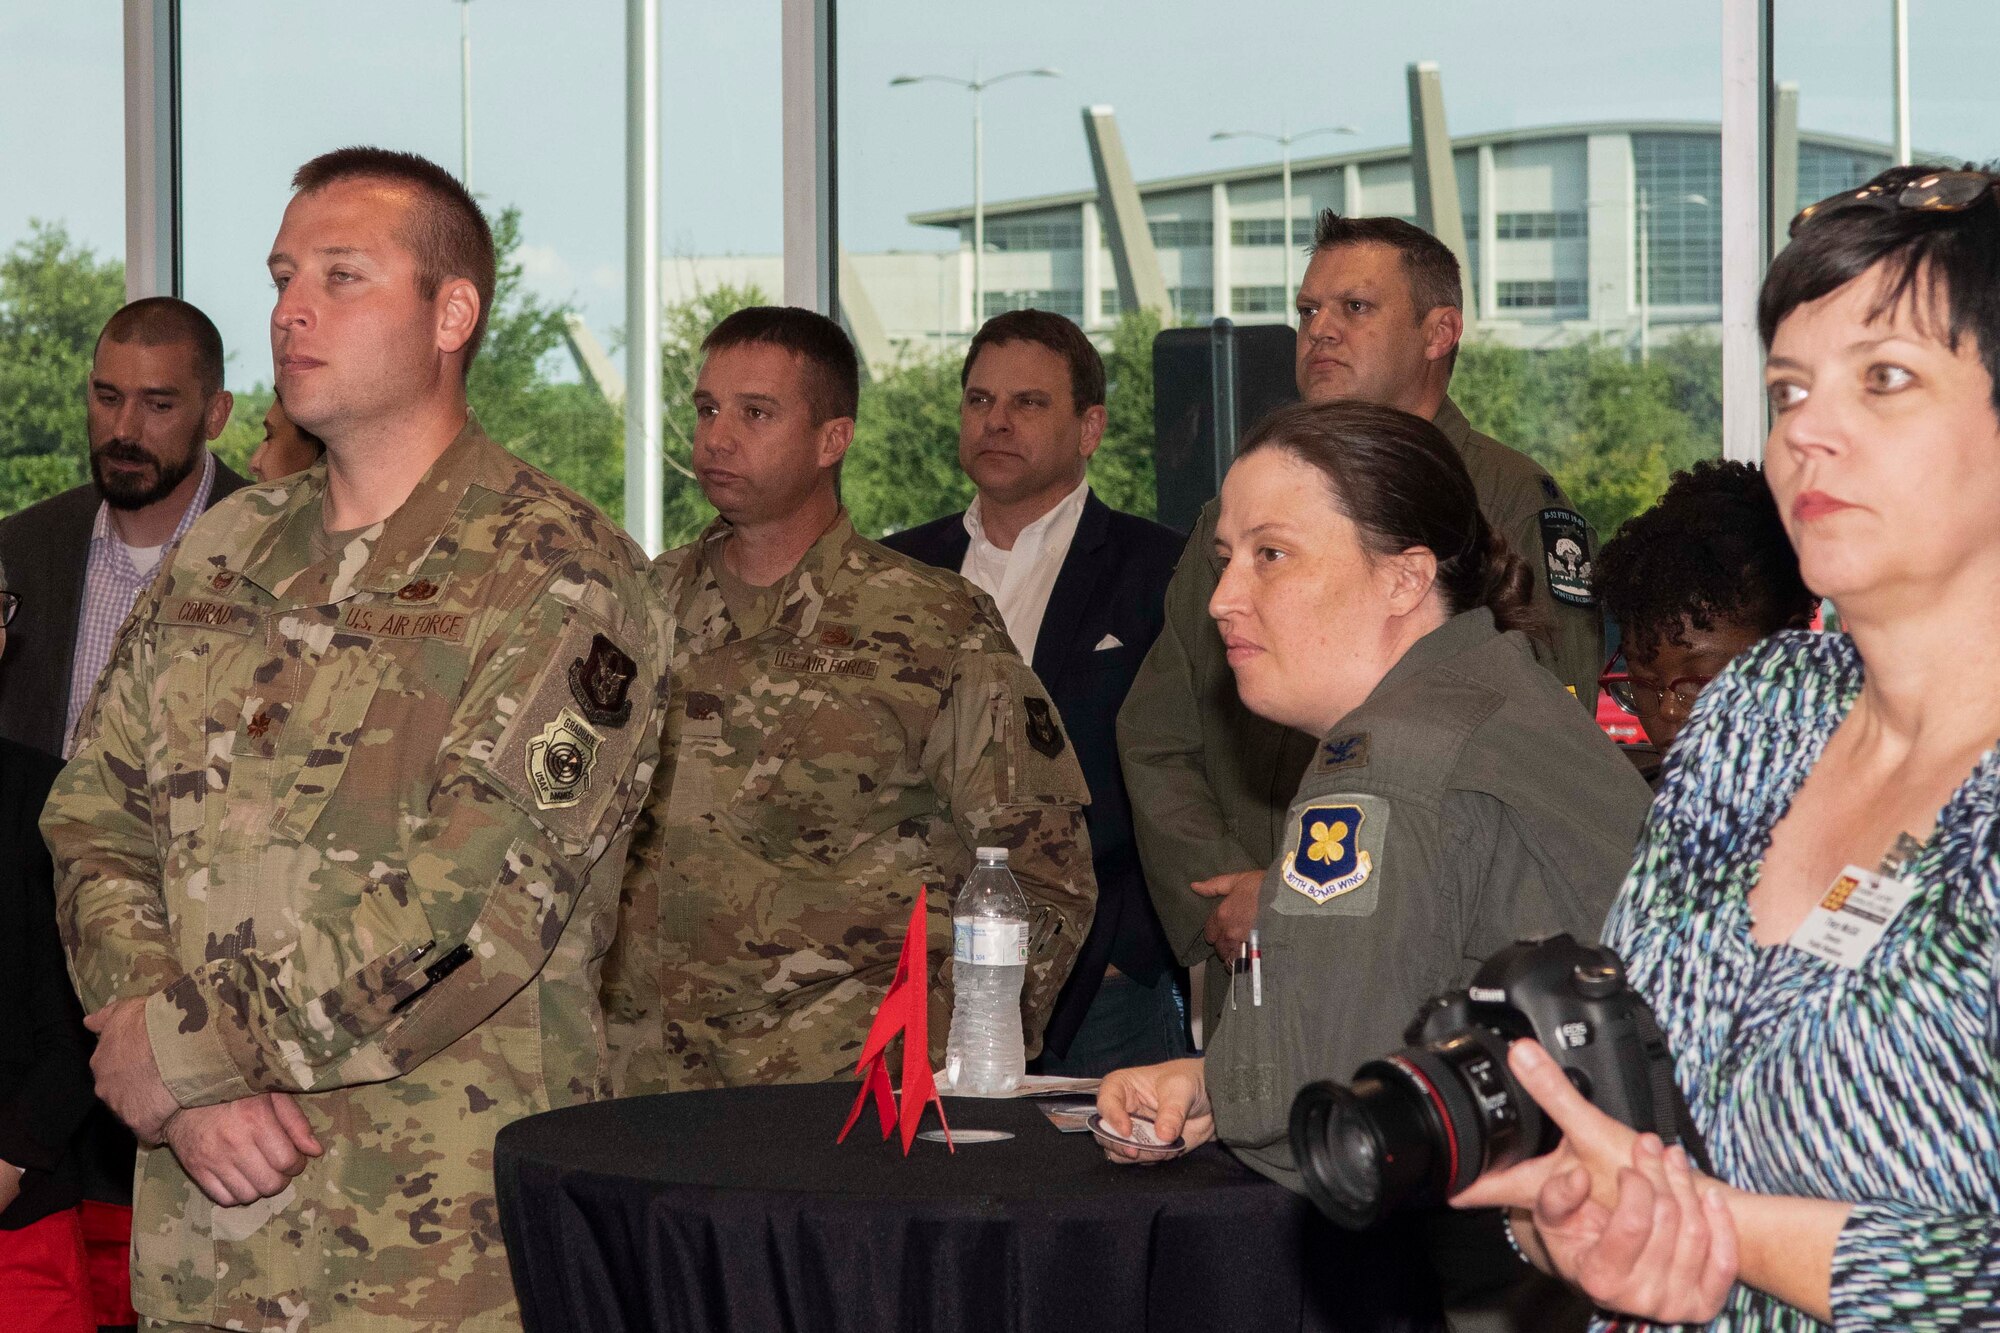 307th Bomb Wing supports inaugural Air Show Innovation Showcase > 307th